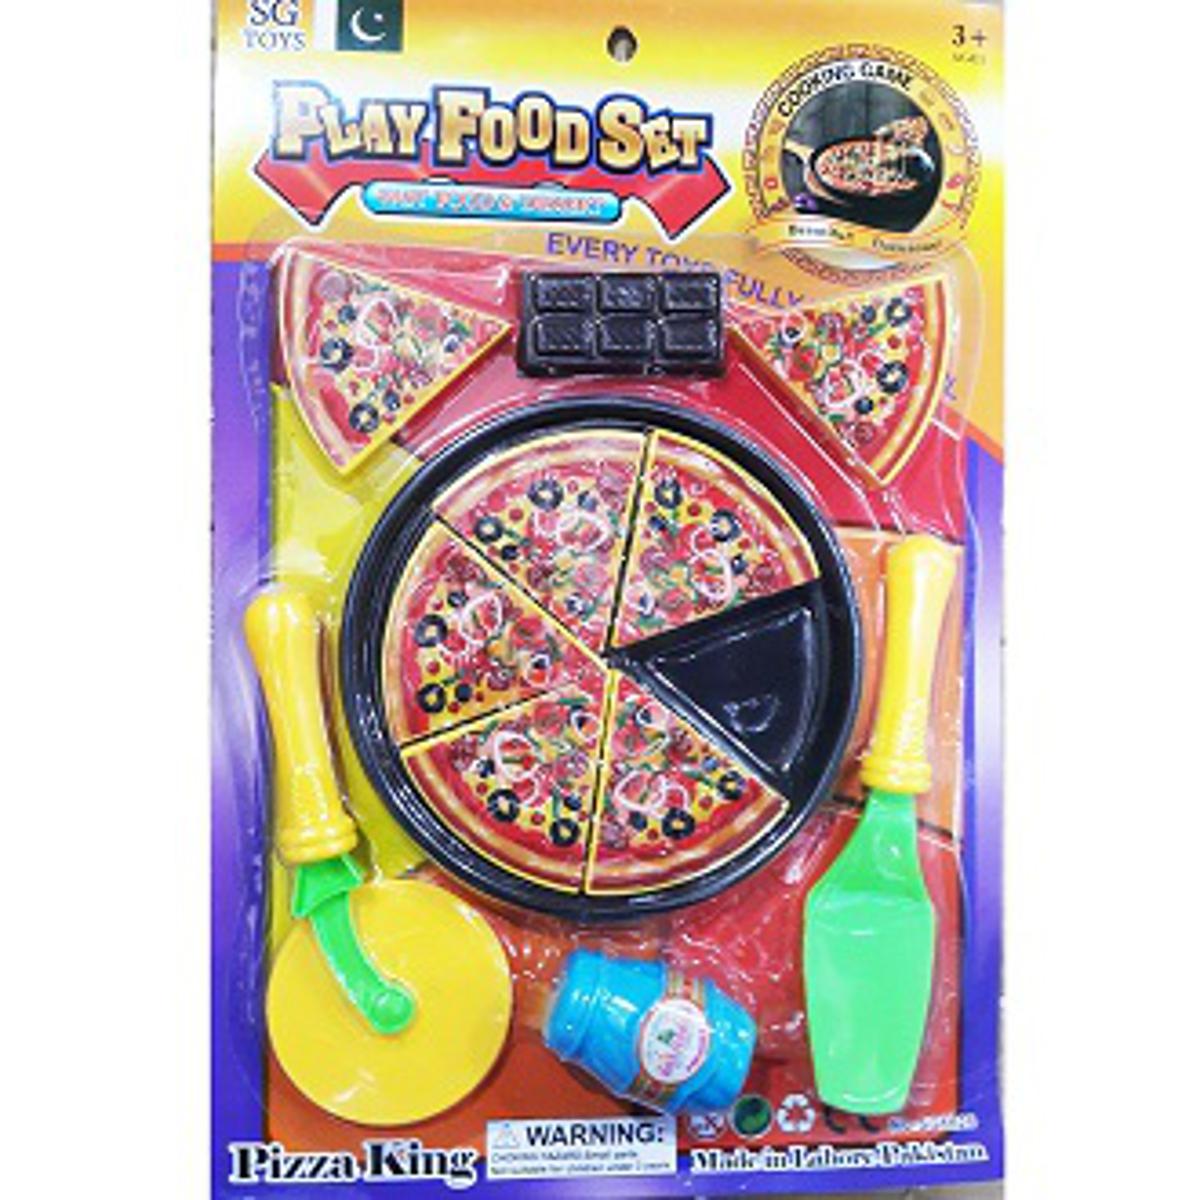 Pizza Set GAme For Kid.S